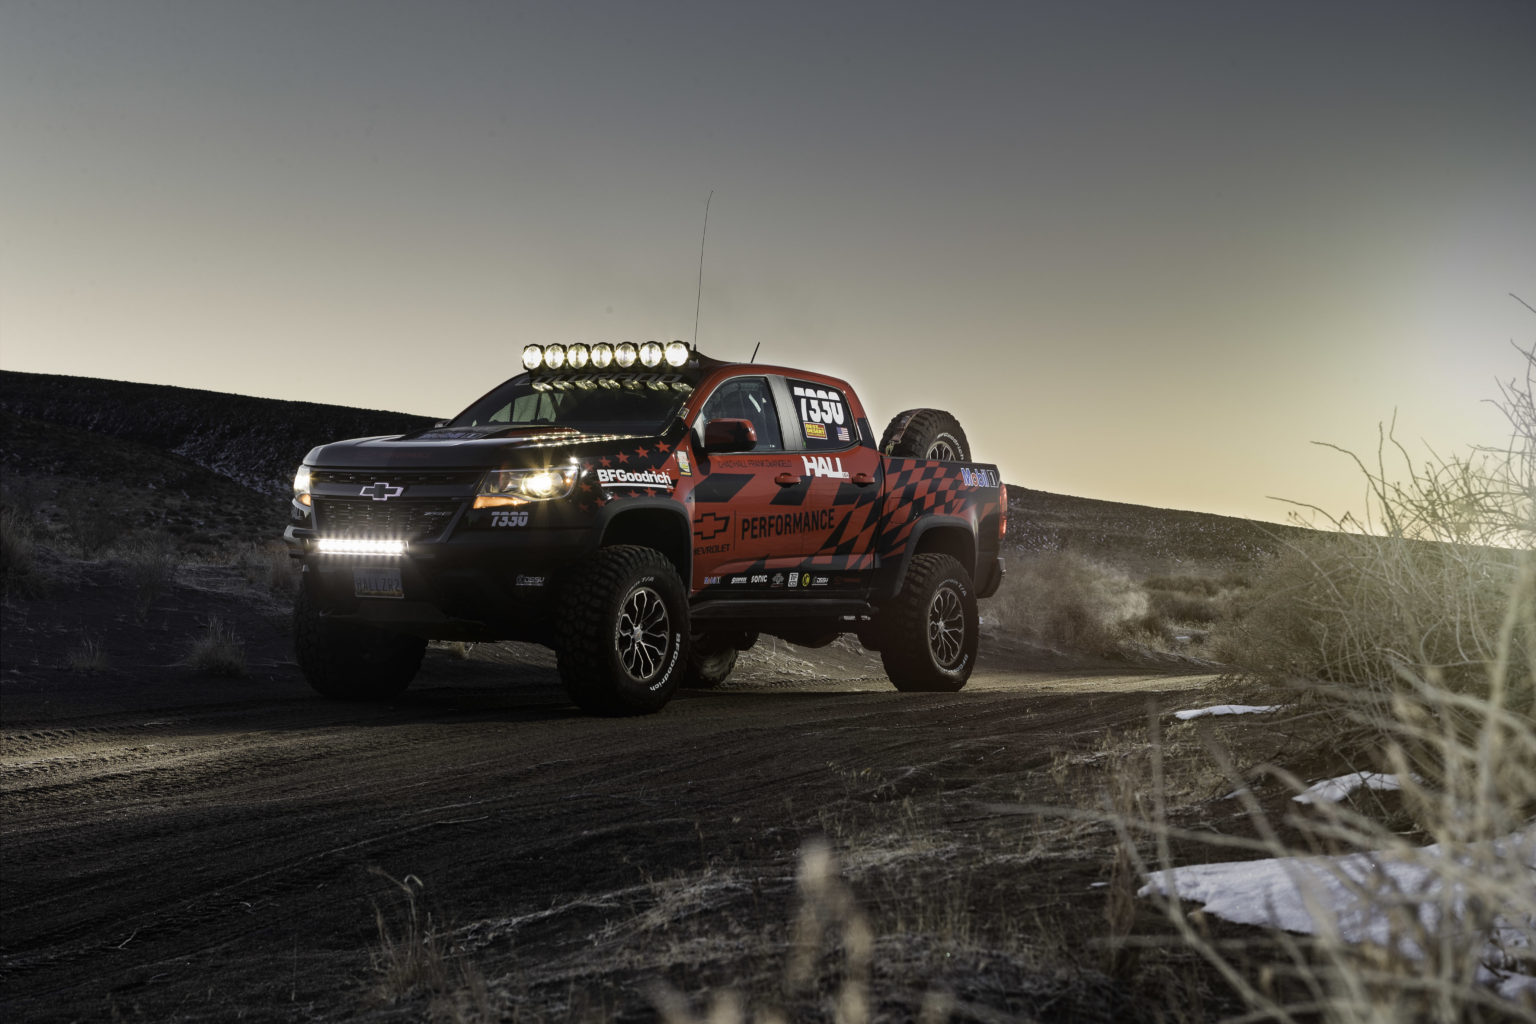 Chevy is offering off-road equipment that can turn your off-roader into a desert prowler.